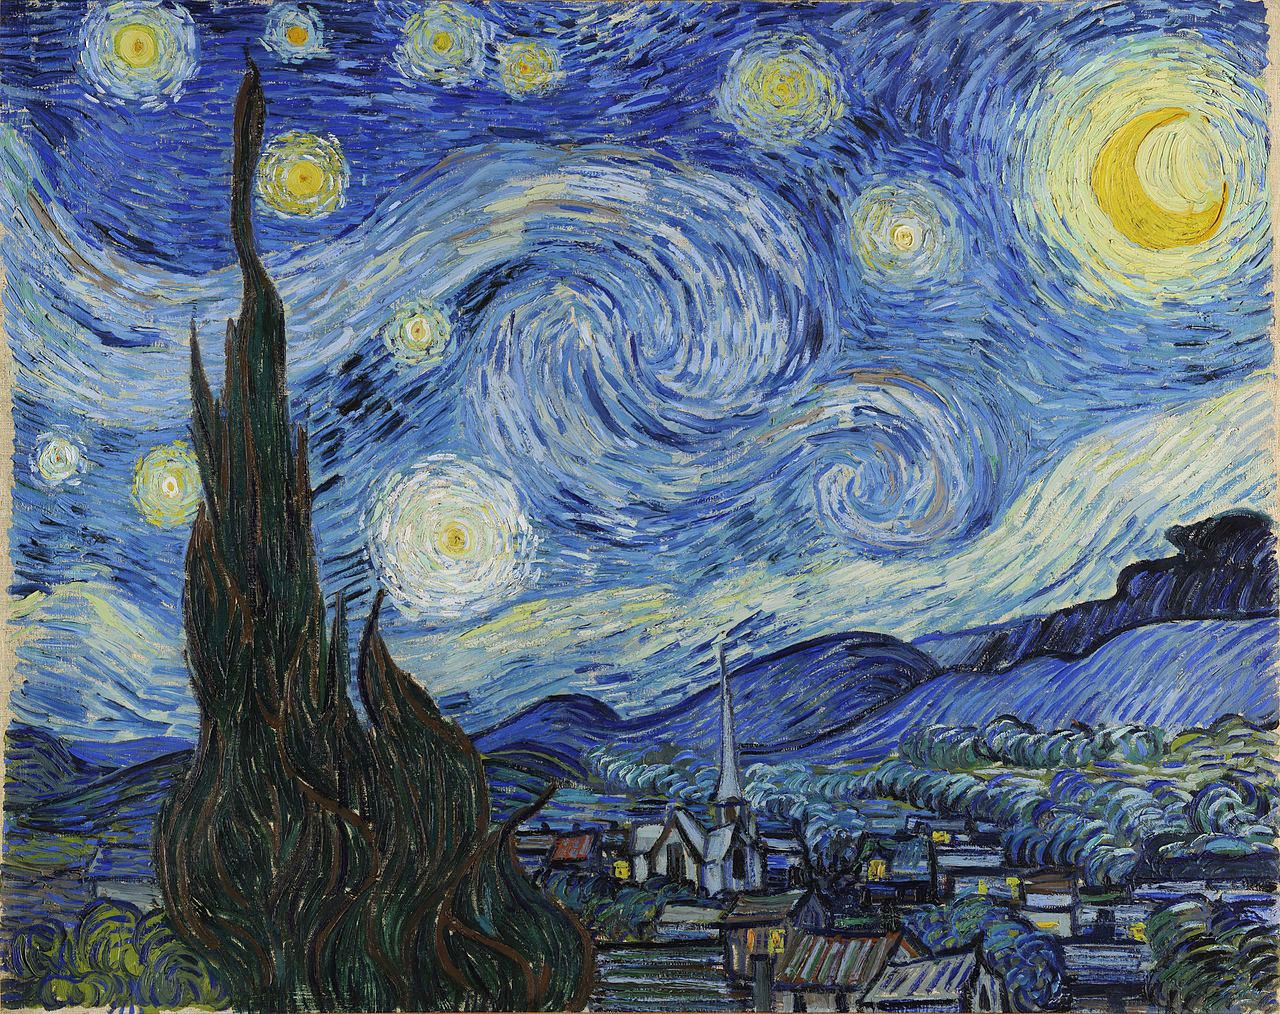 van Gogh's Starry Night was inspiration for a painting in Among Us